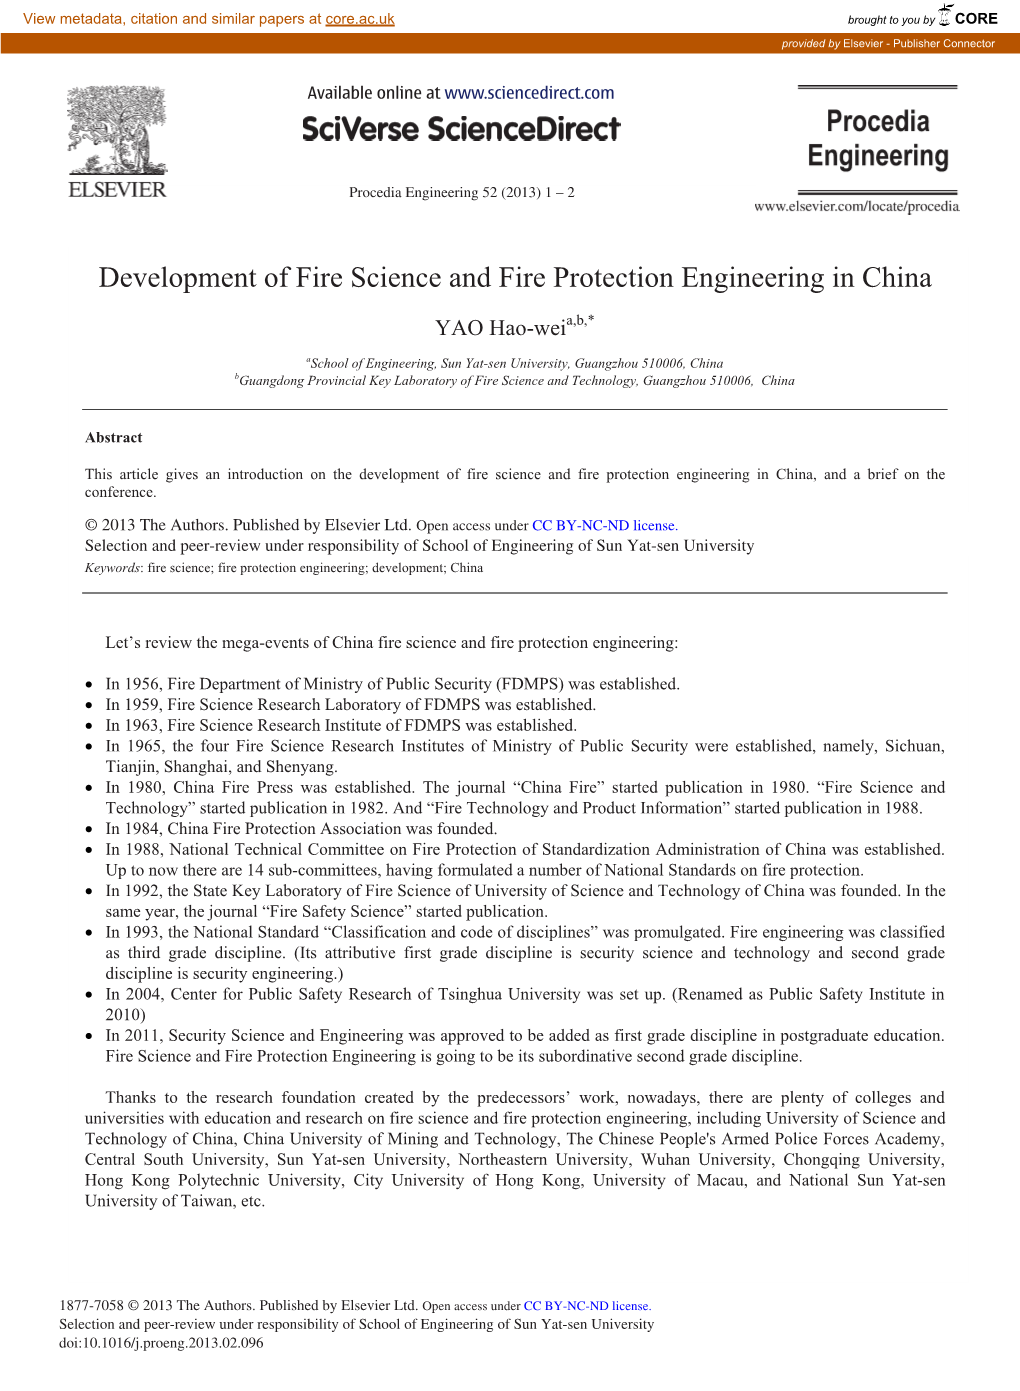 Development of Fire Science and Fire Protection Engineering in China